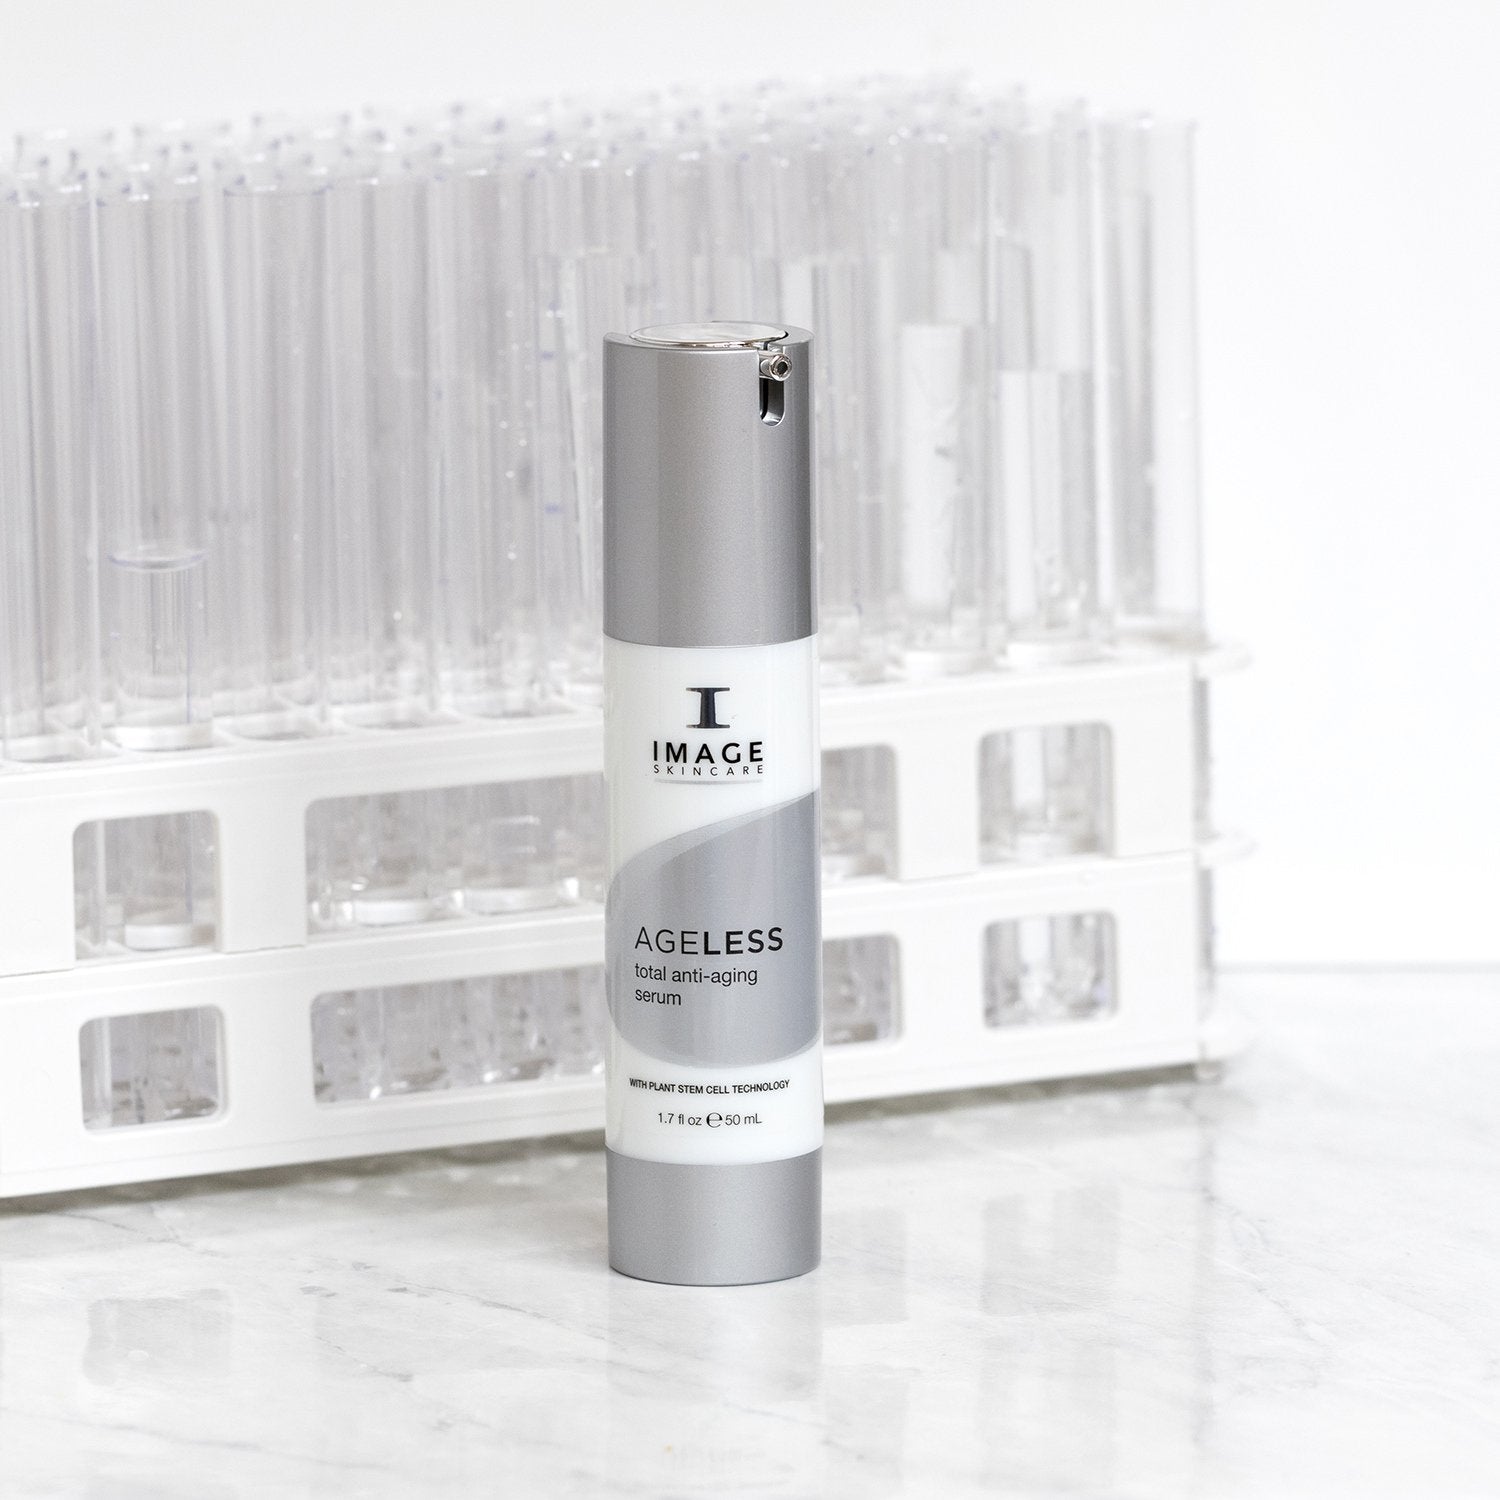 AGELESS total anti-ageing serum with plant stem cell technology